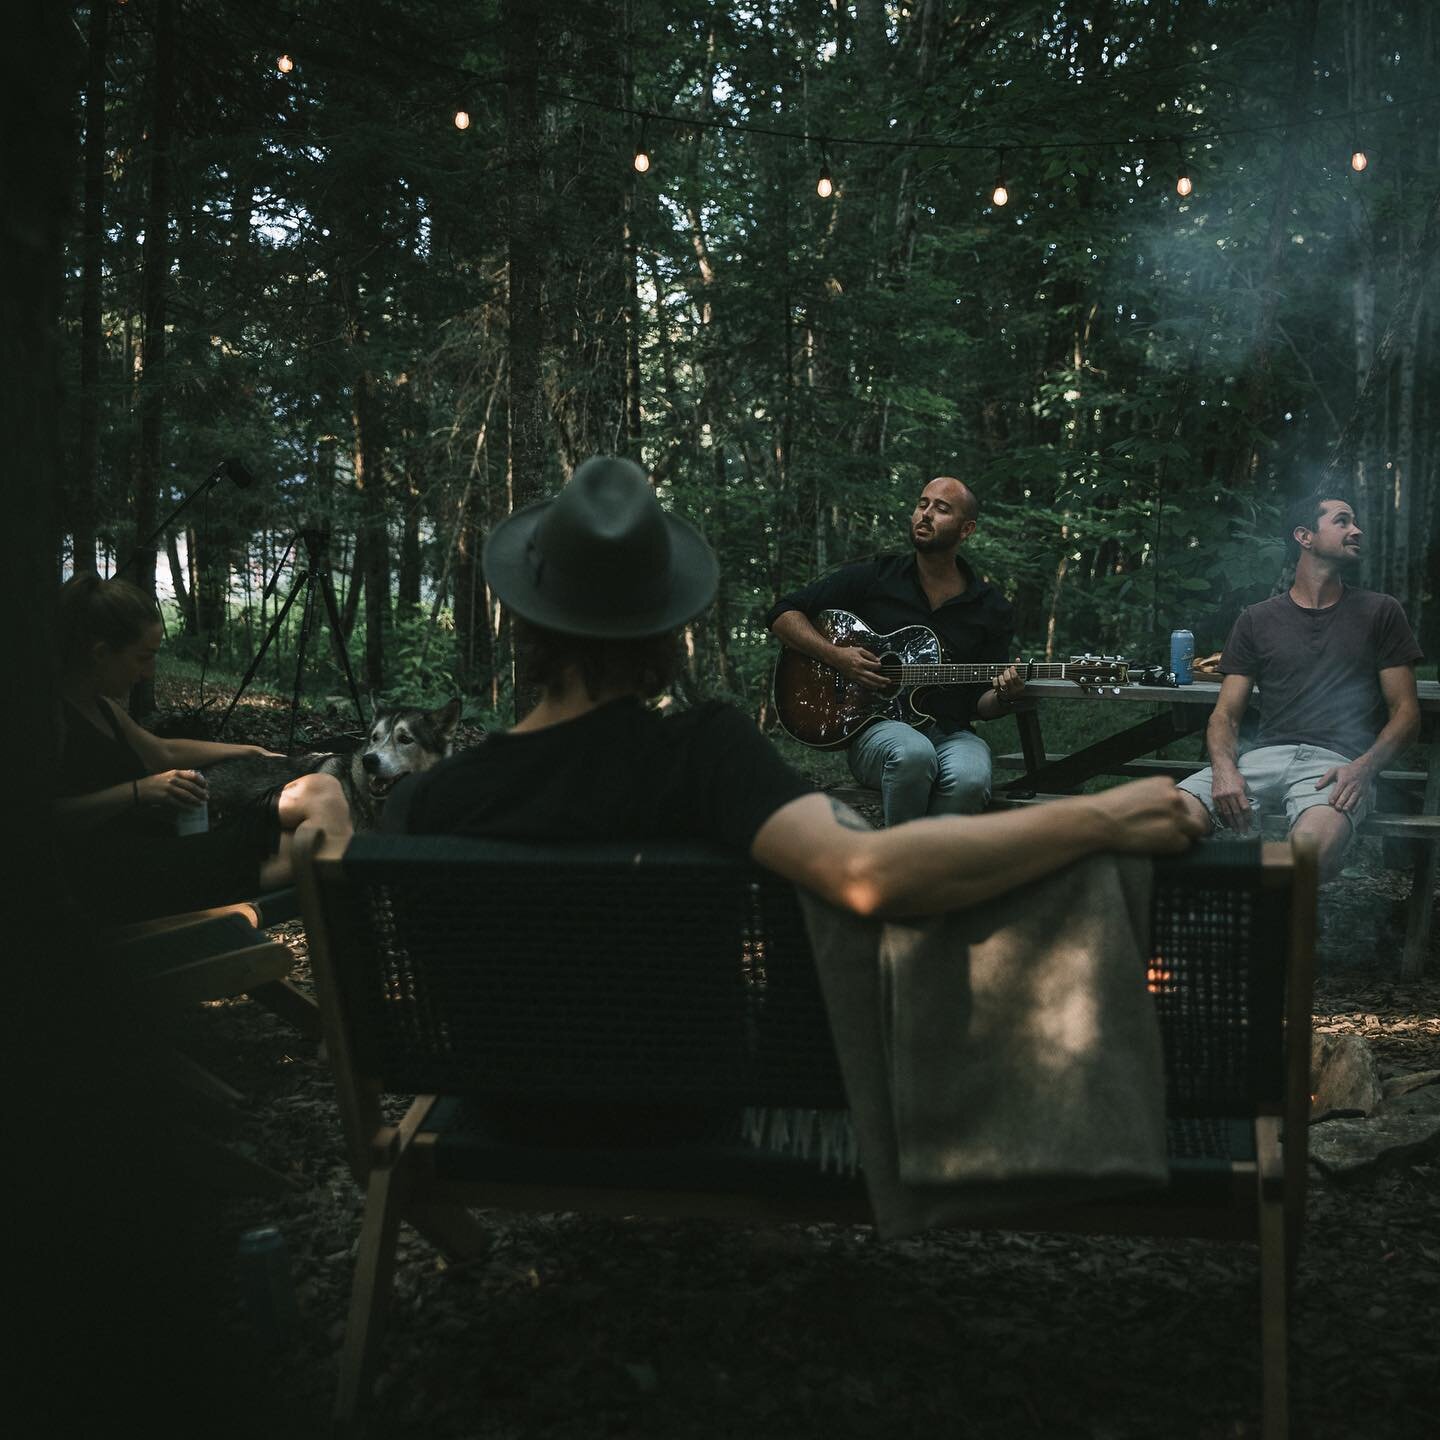 The pre-dinner fire-hang @fort_treehouse_co set the vibe for the evening&hellip;
.
.
.
📸 @bellwether.creative 
#forttreehouse #nickandbenton #vibe #bonfiresessions #thewoods #livemusic #feelthevibe #myhaliburtonhighlands #muskoka #oursound #nature #